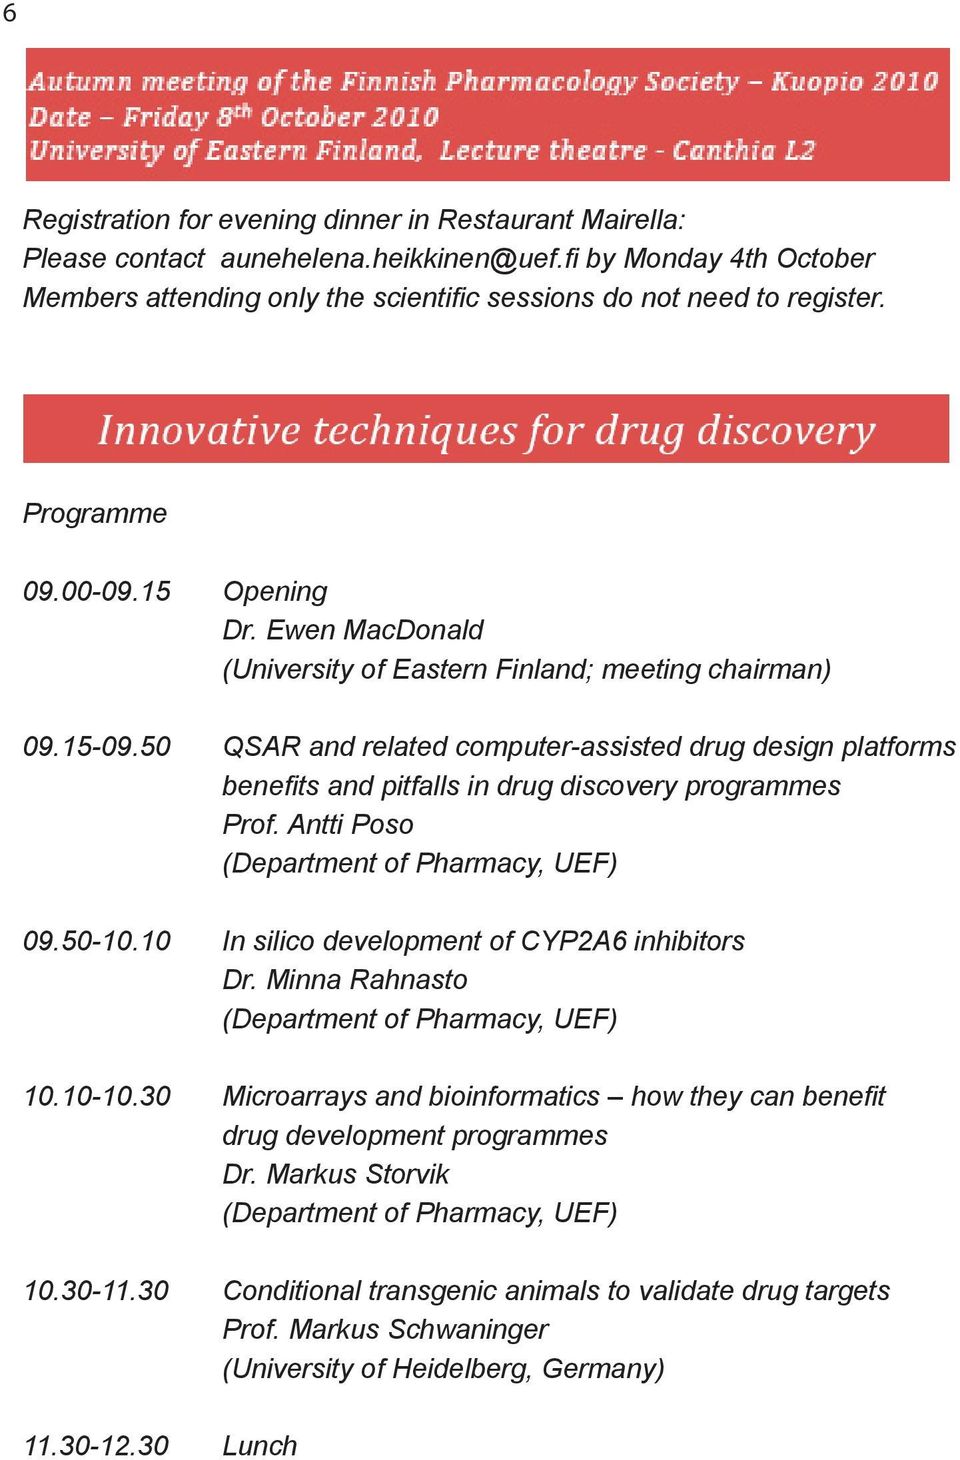 50 QSAR and related computer-assisted drug design platforms benefits and pitfalls in drug discovery programmes Prof. Antti Poso (Department of Pharmacy, UEF) 09.50-10.